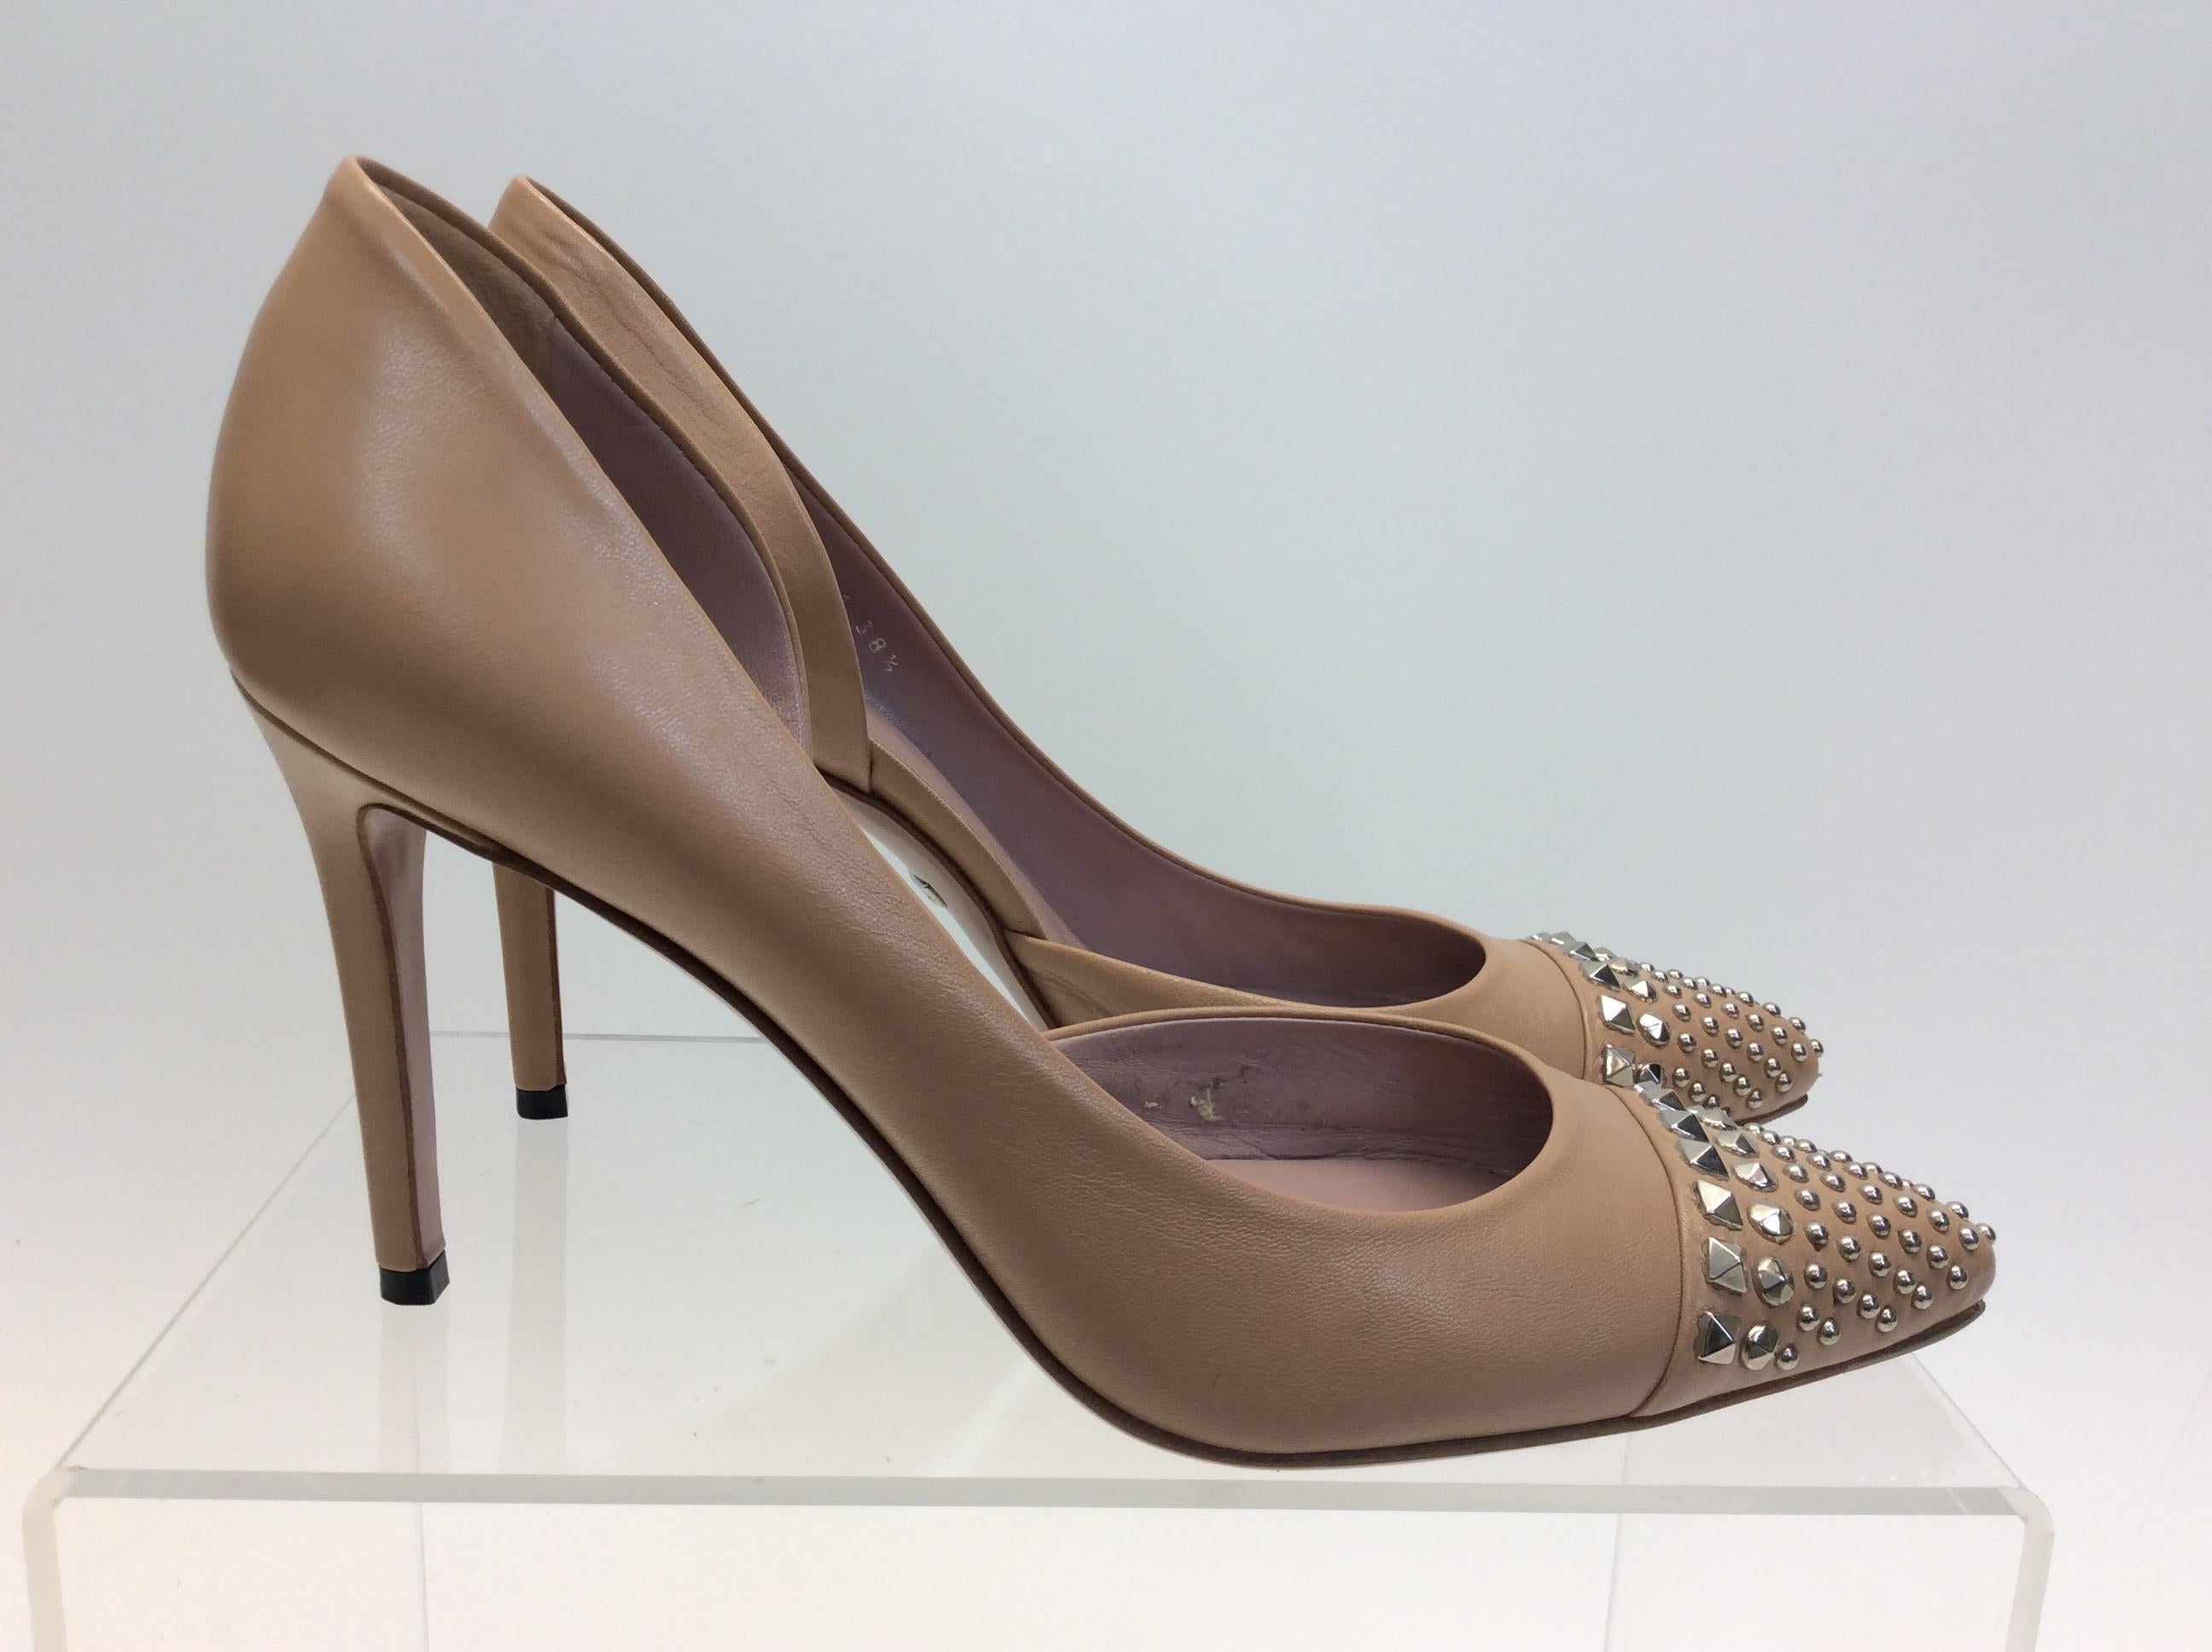 Gucci Tan Leather Studded Heels In Good Condition For Sale In Narberth, PA